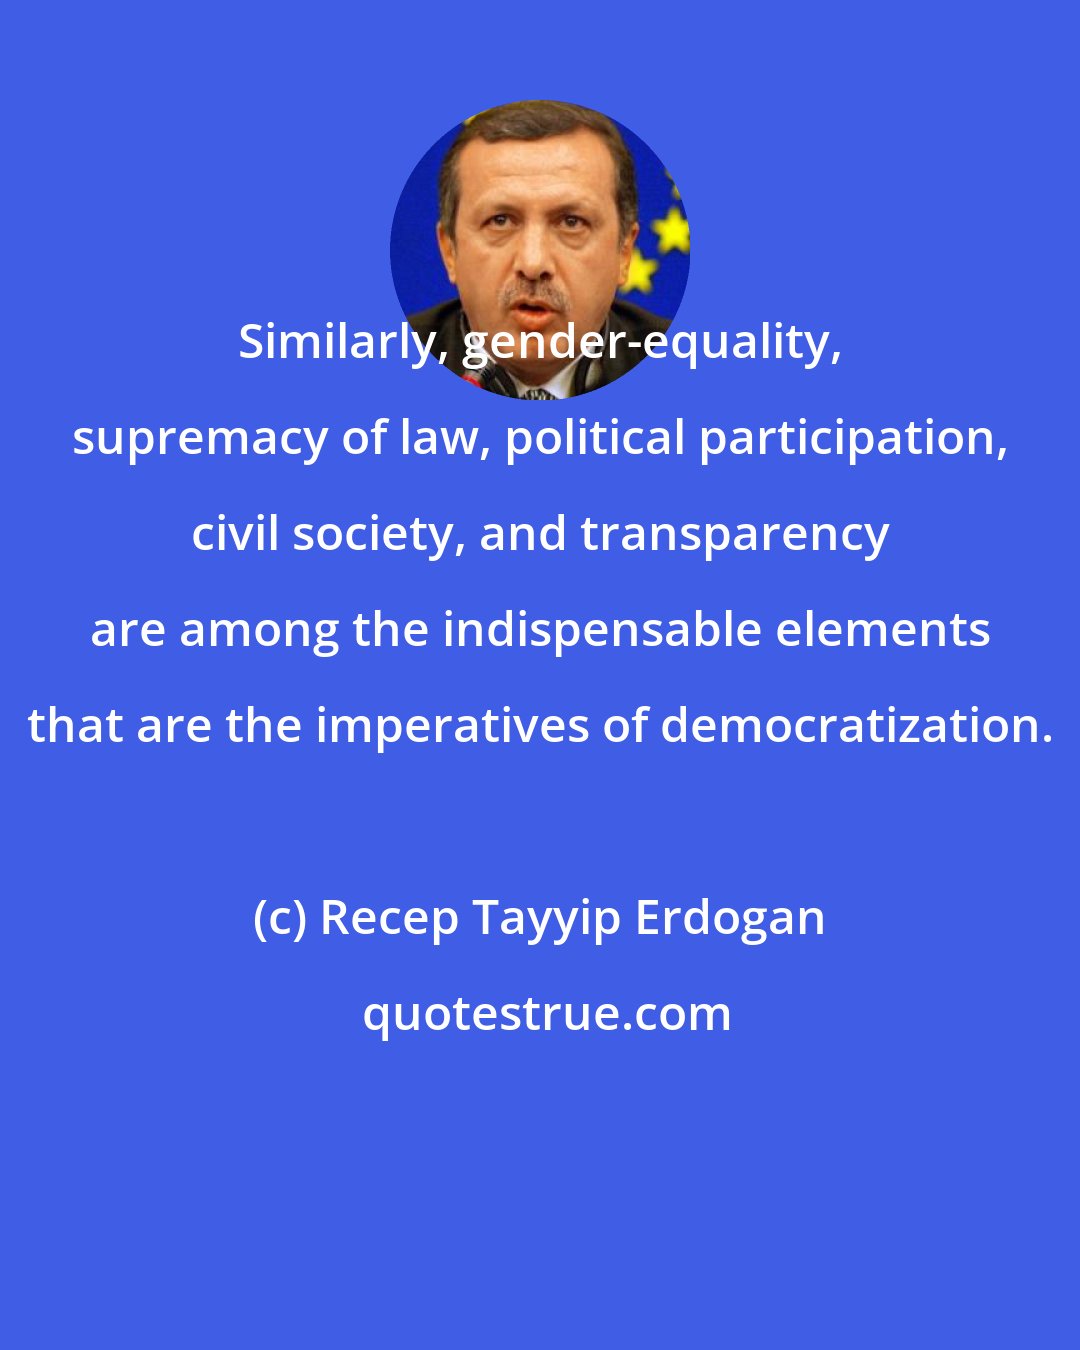 Recep Tayyip Erdogan: Similarly, gender-equality, supremacy of law, political participation, civil society, and transparency are among the indispensable elements that are the imperatives of democratization.